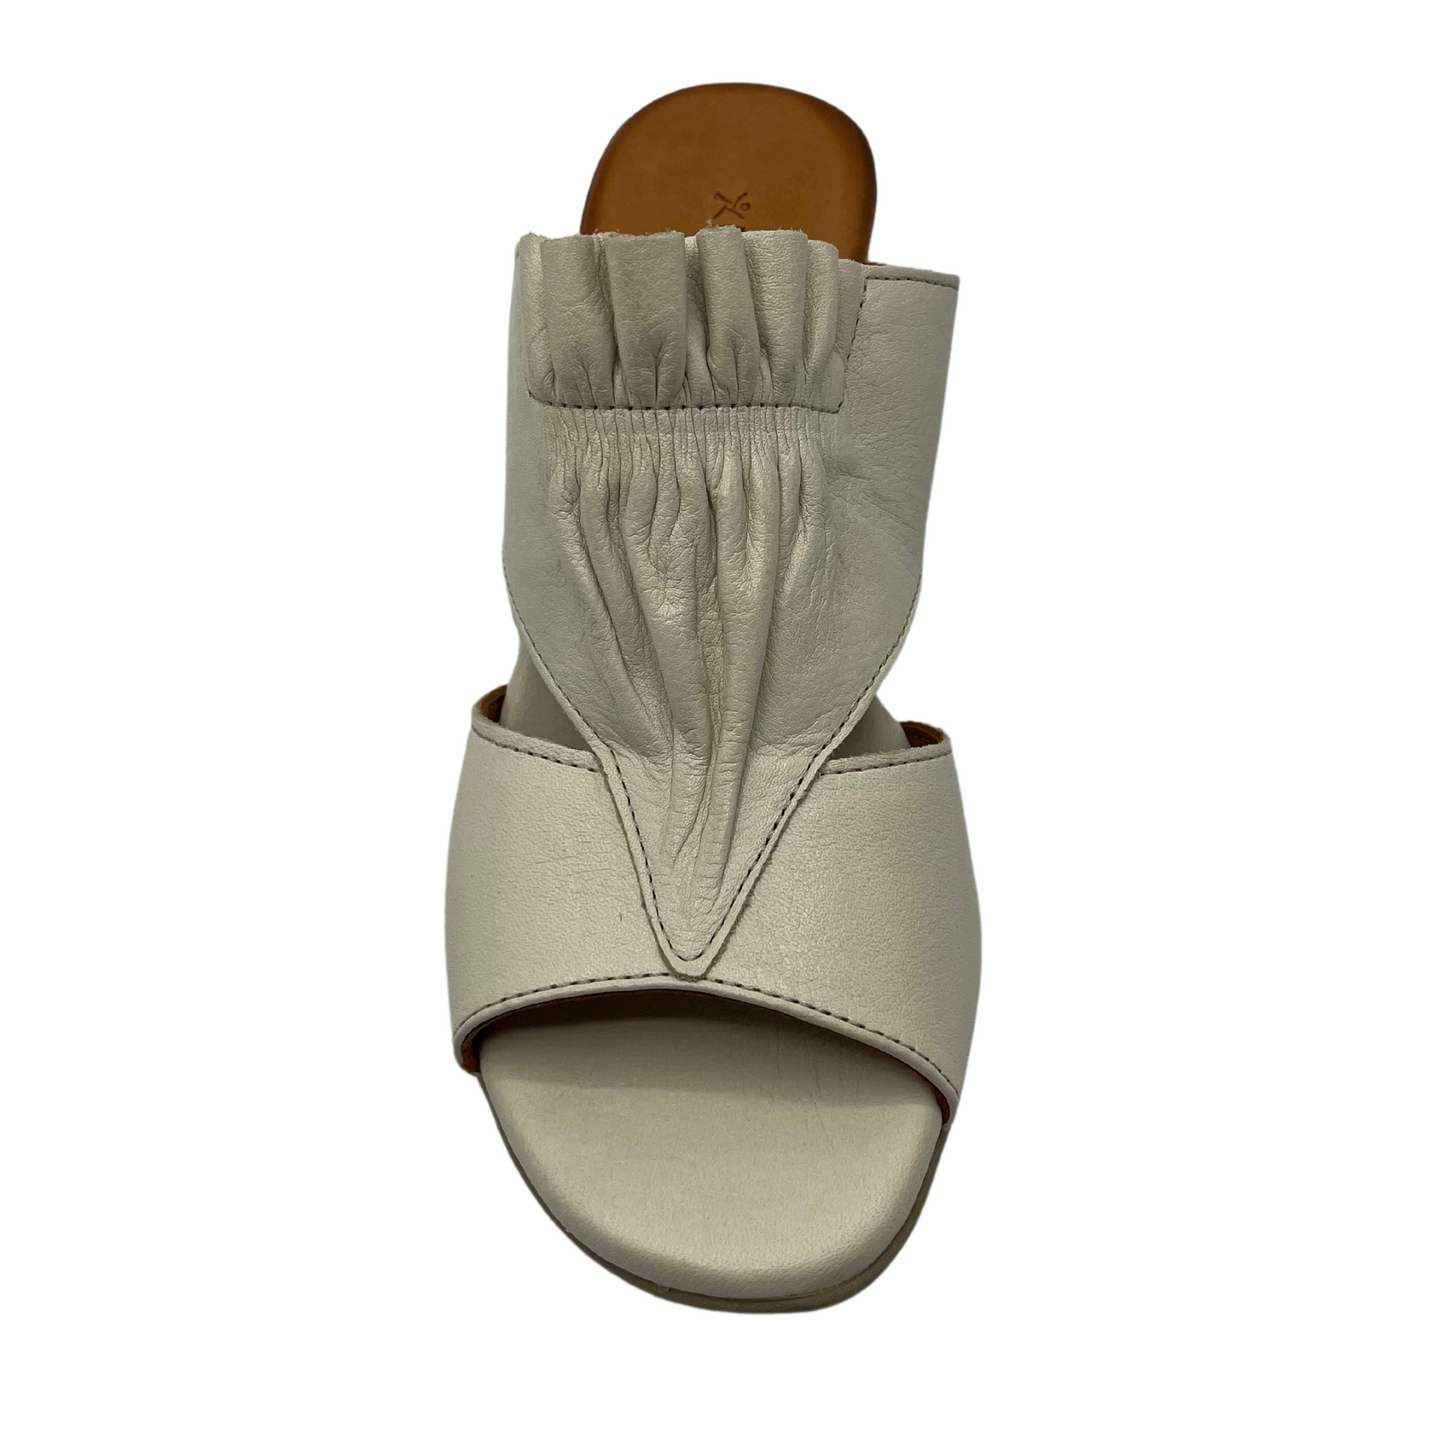 Top view of white leather sandal with block heel and peep toe